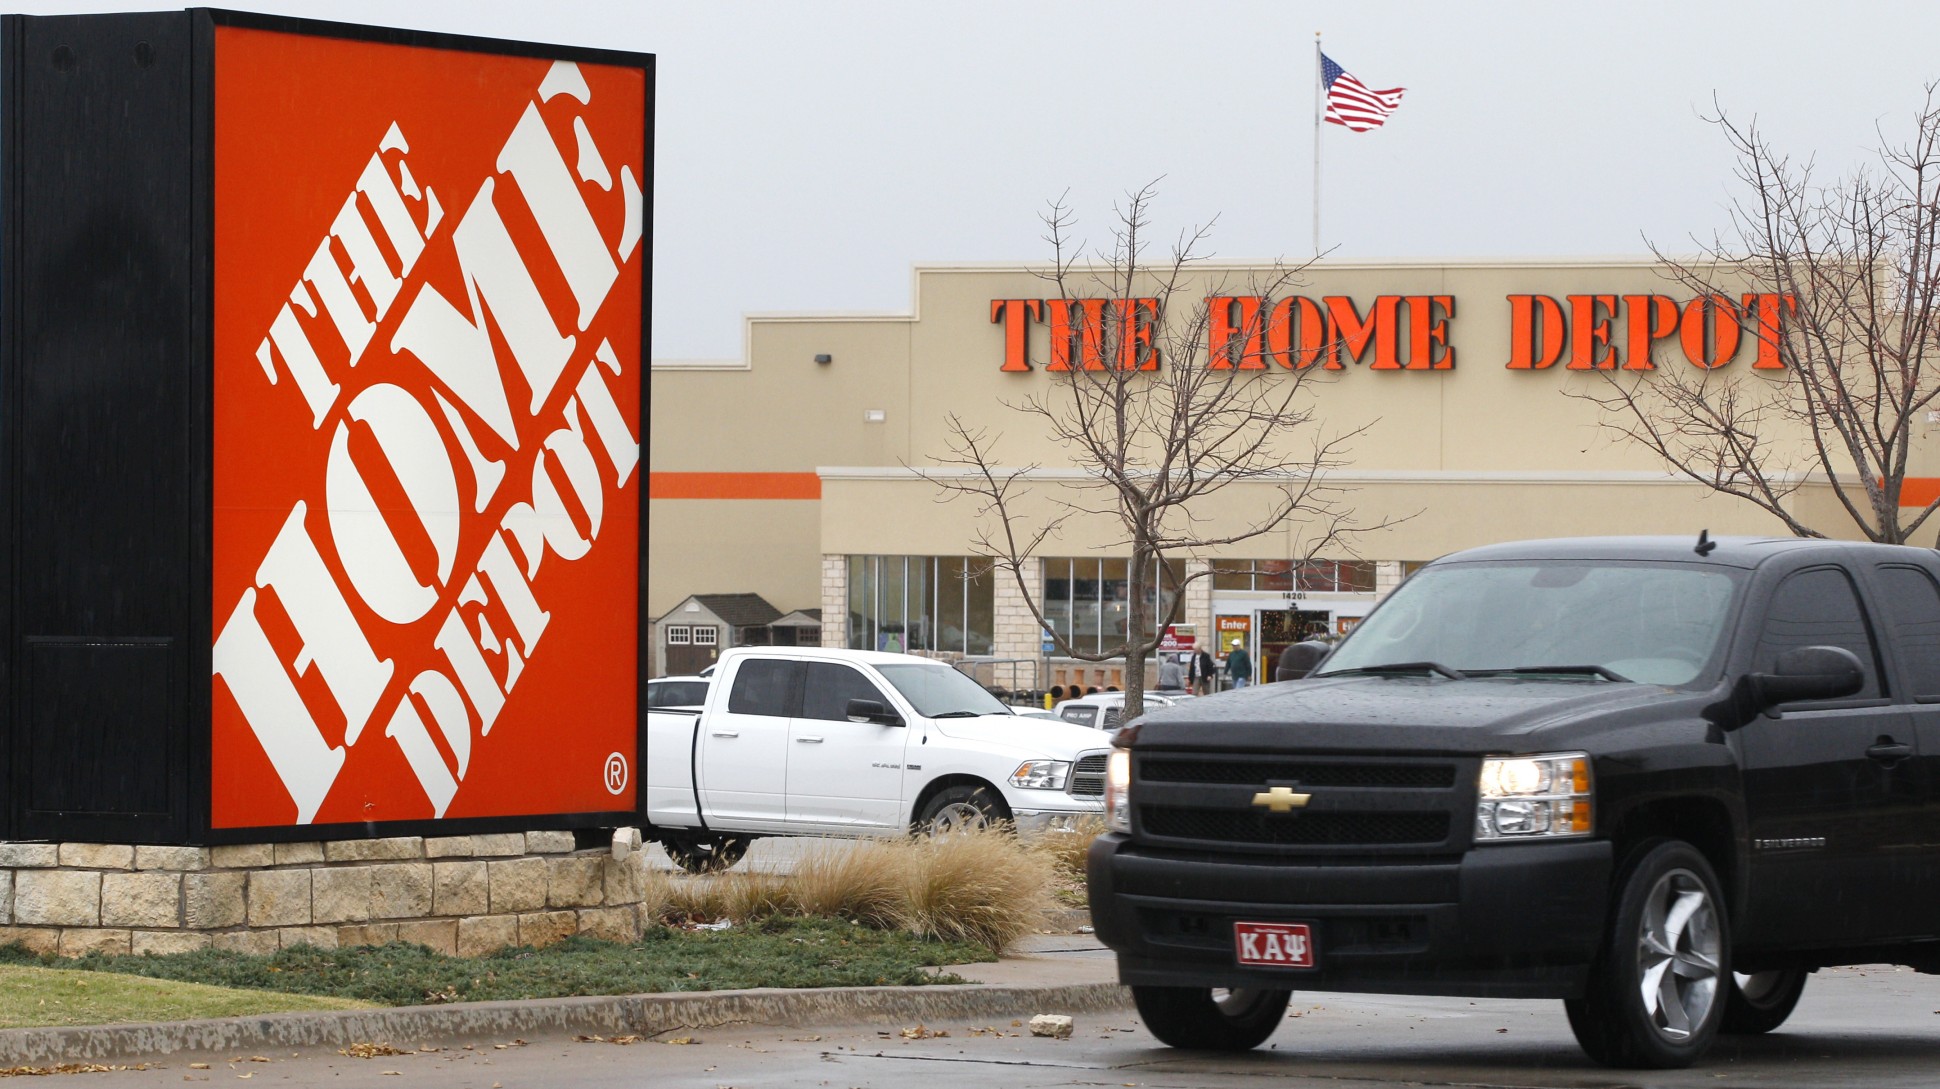 Woman’s Body Found On Top Of A Home Depot Store